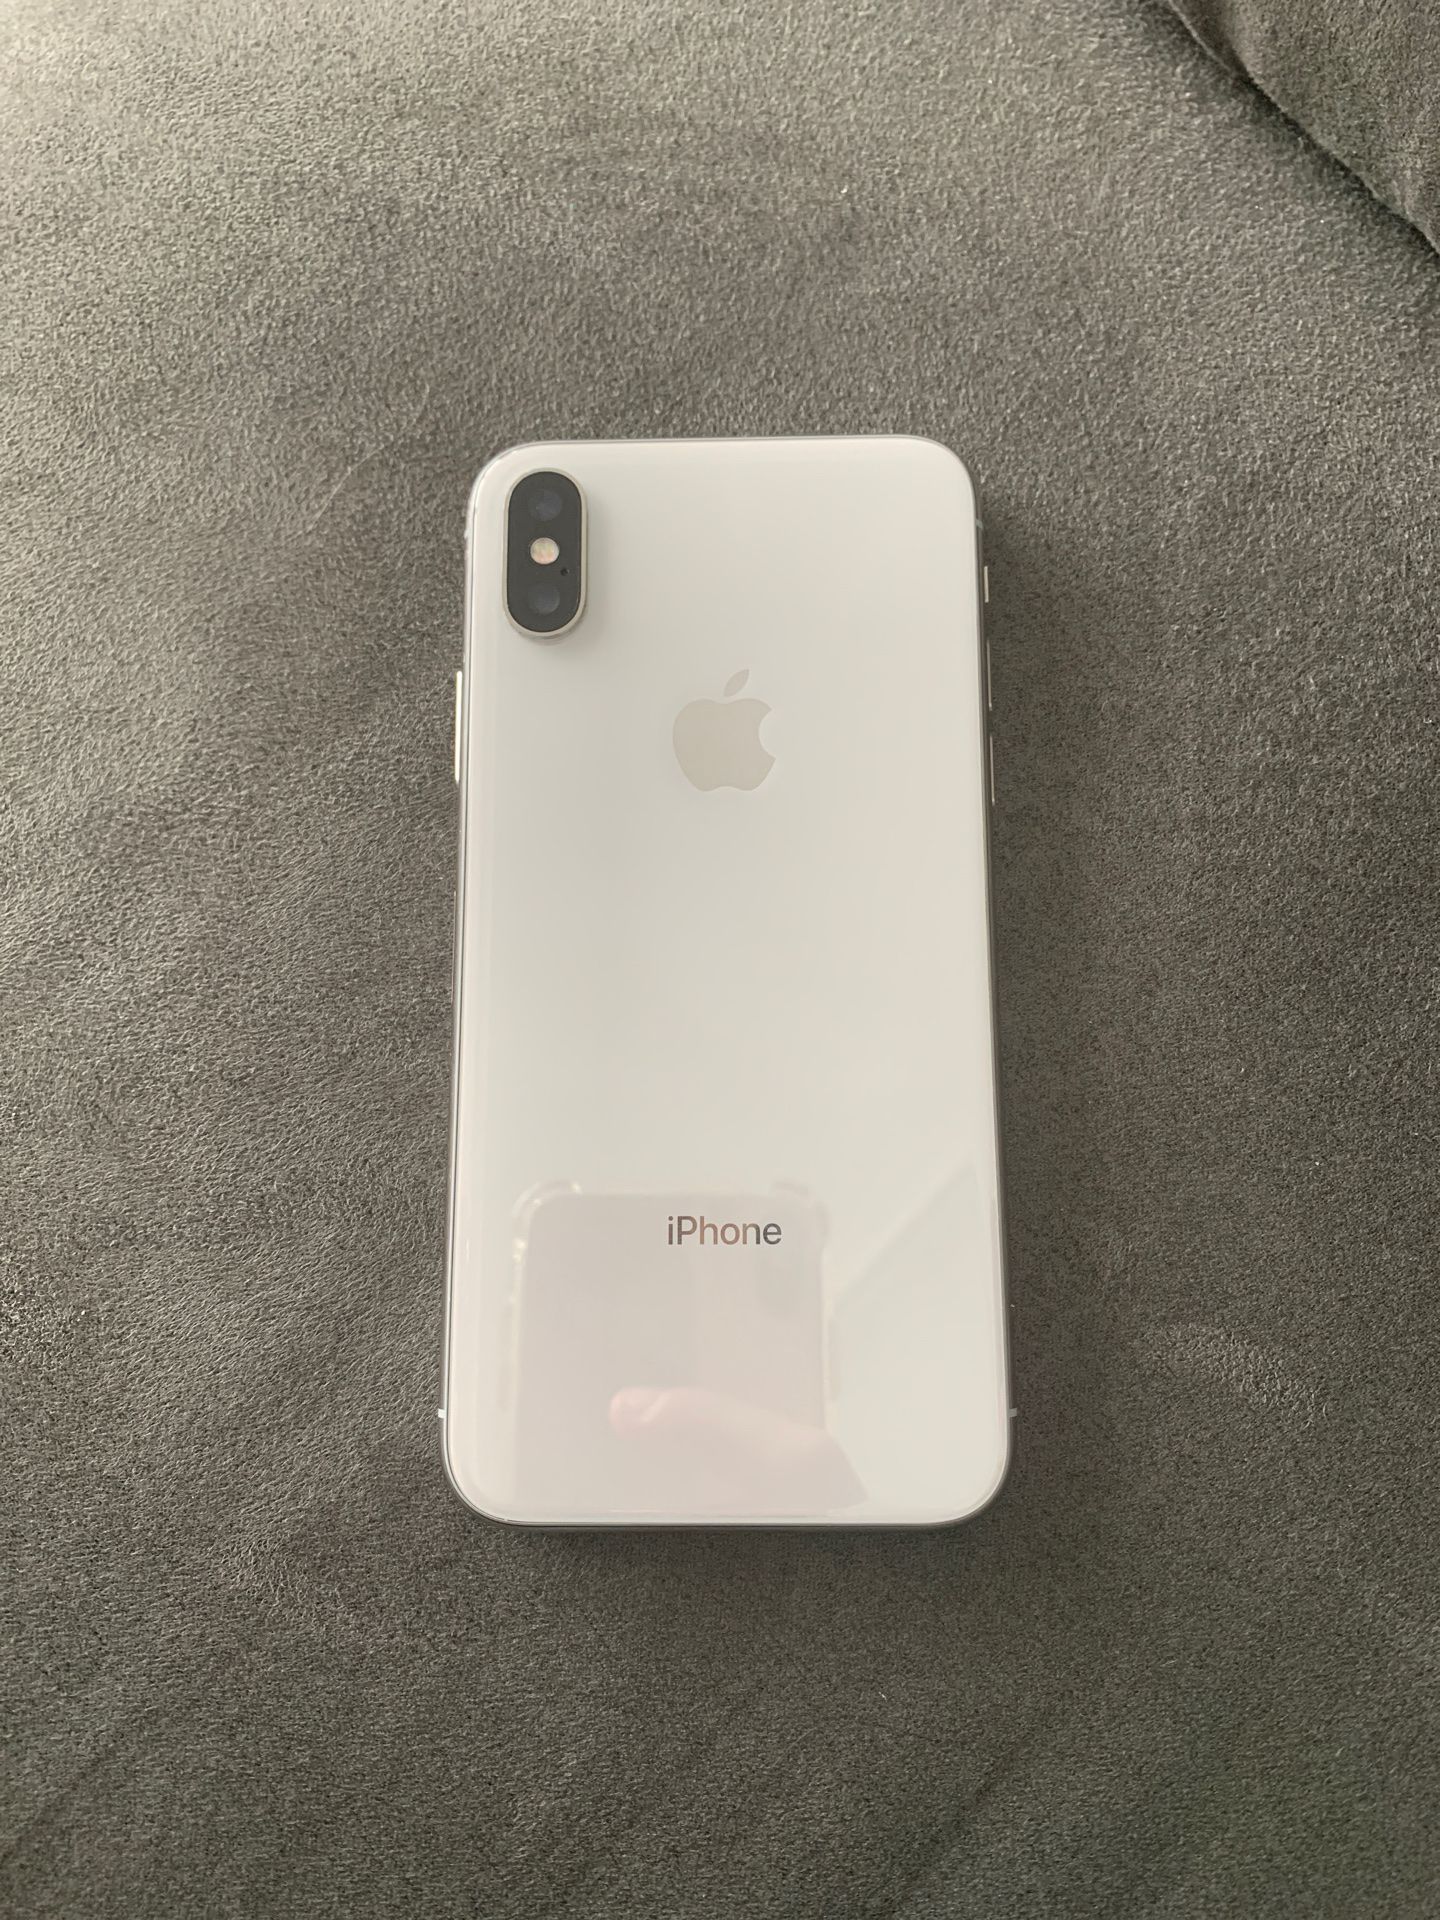 Iphone x 256gb unlocked for all companies